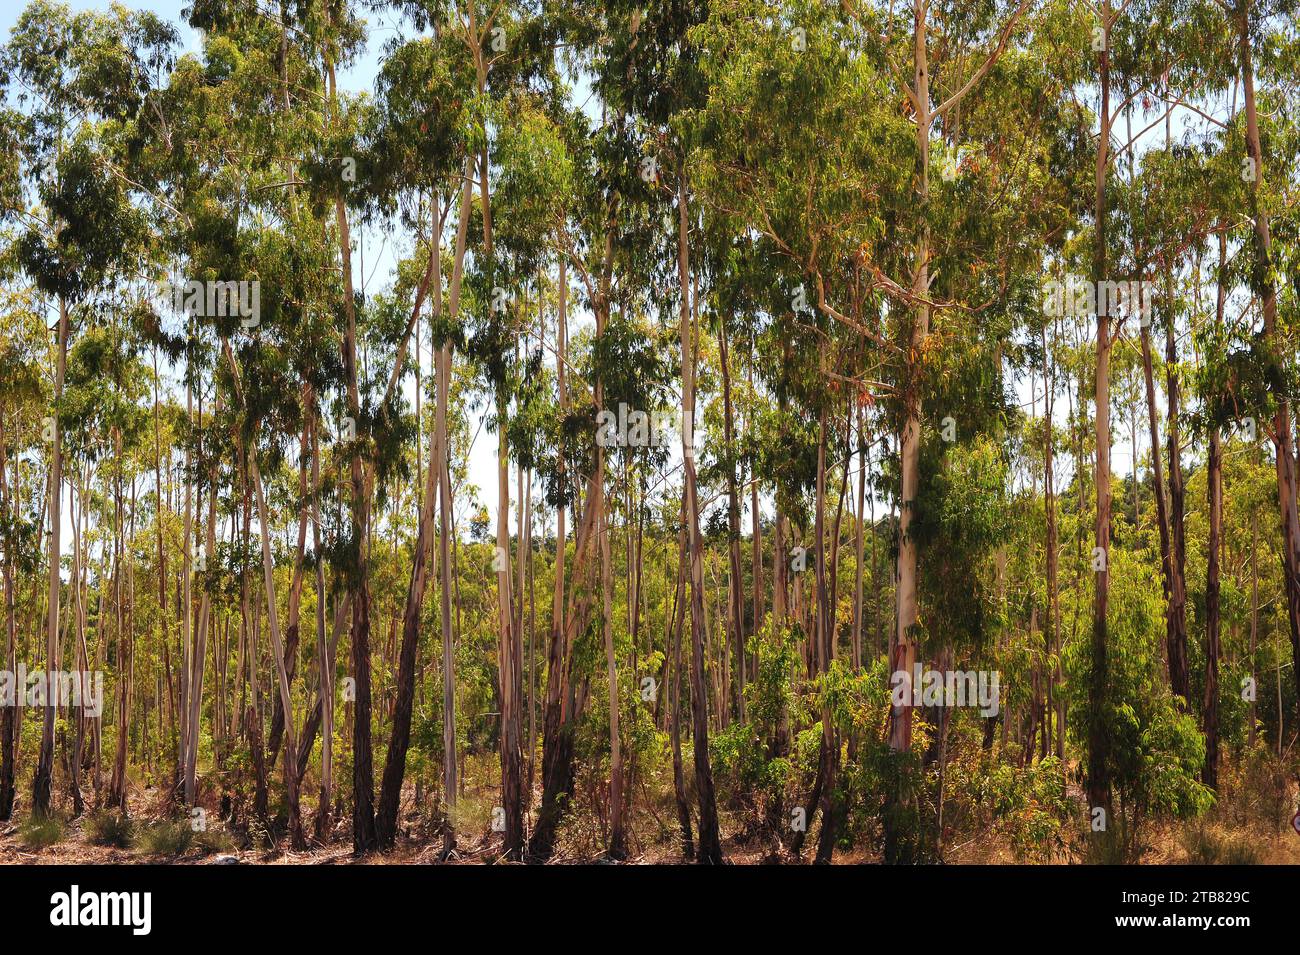 Blue gum (Eucalyptus globulus) is a tree native to Australia but widely cultivated in many countries for its wood. This photo was taken in Portugal. Stock Photo